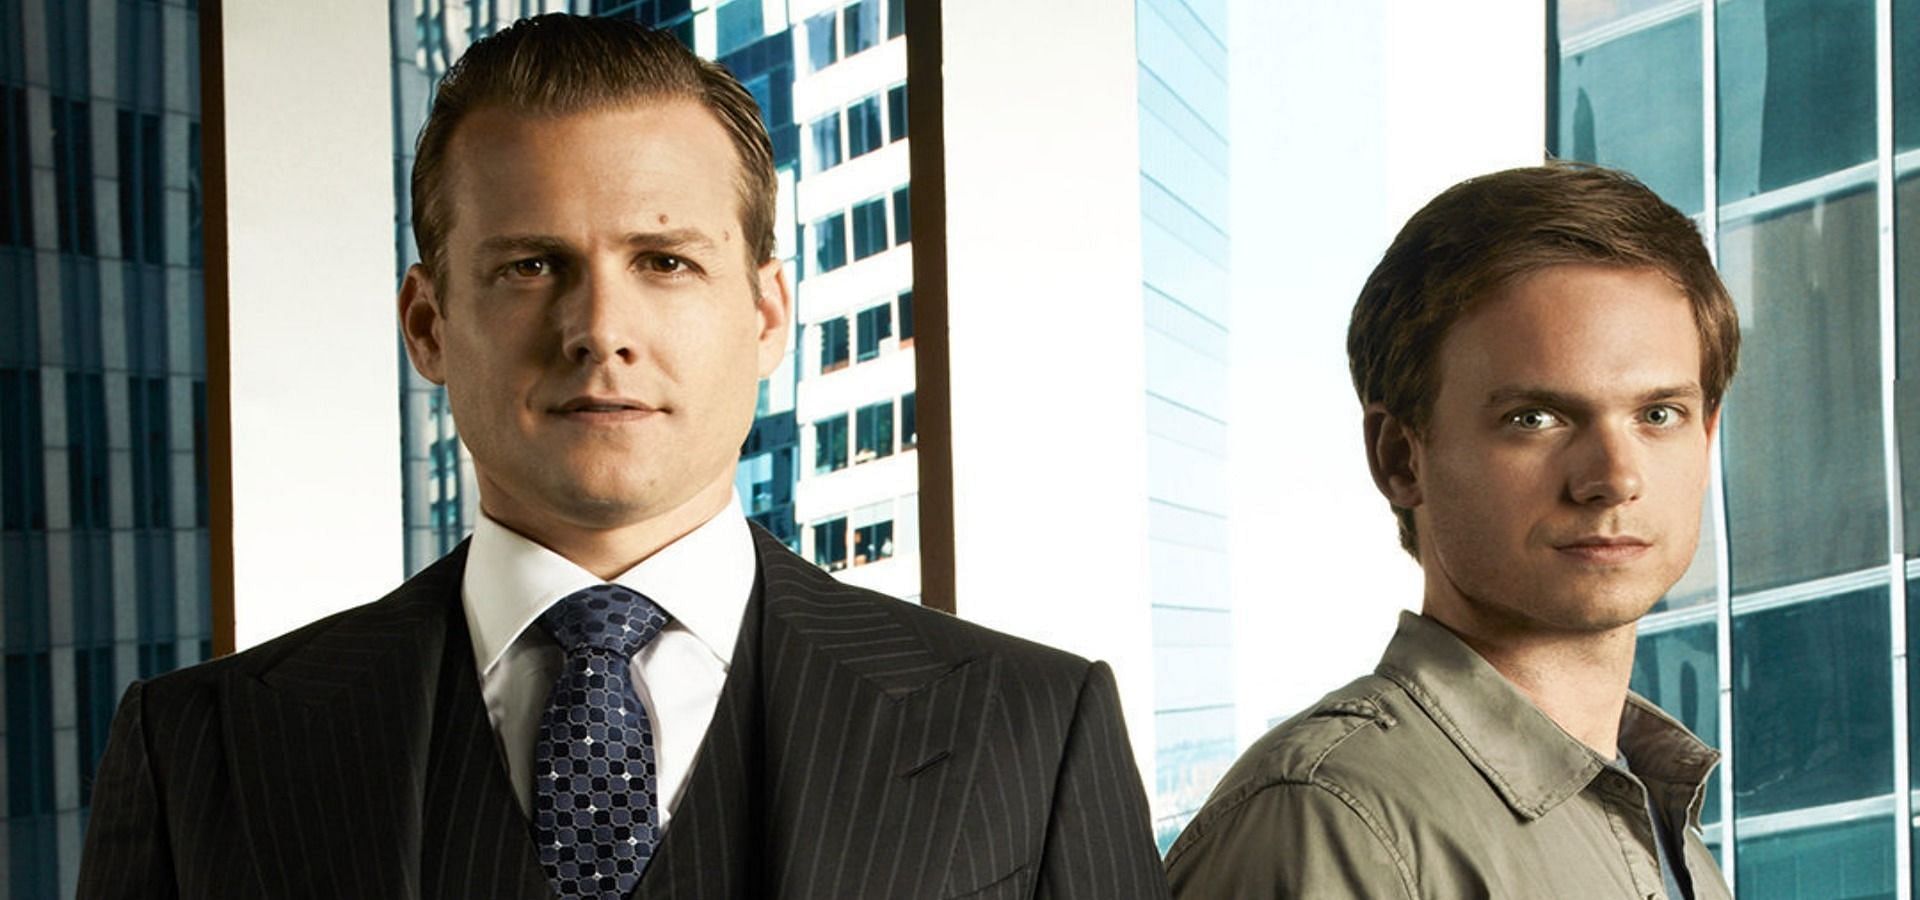 Mike Ross and Harvey Specter Image via suitspeacock@Instagram)